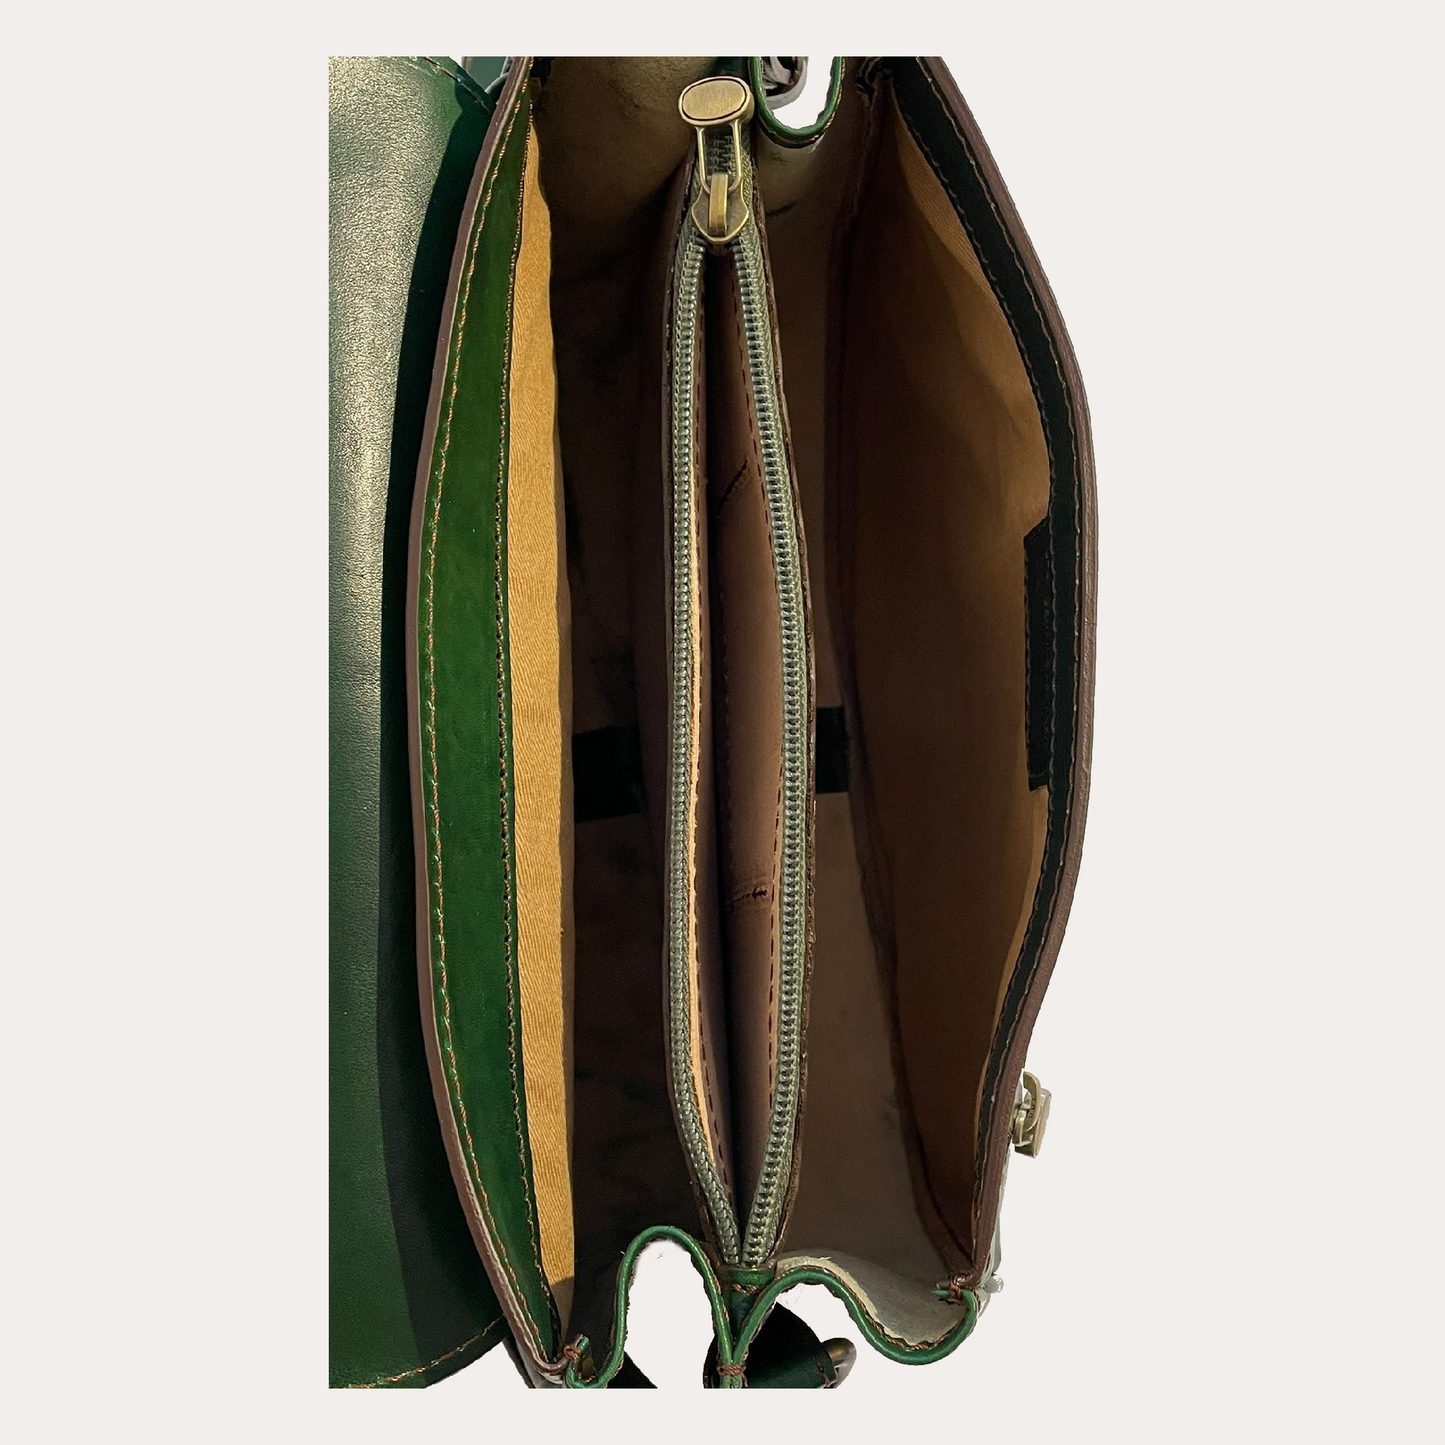 Green Leather Flapover Bag